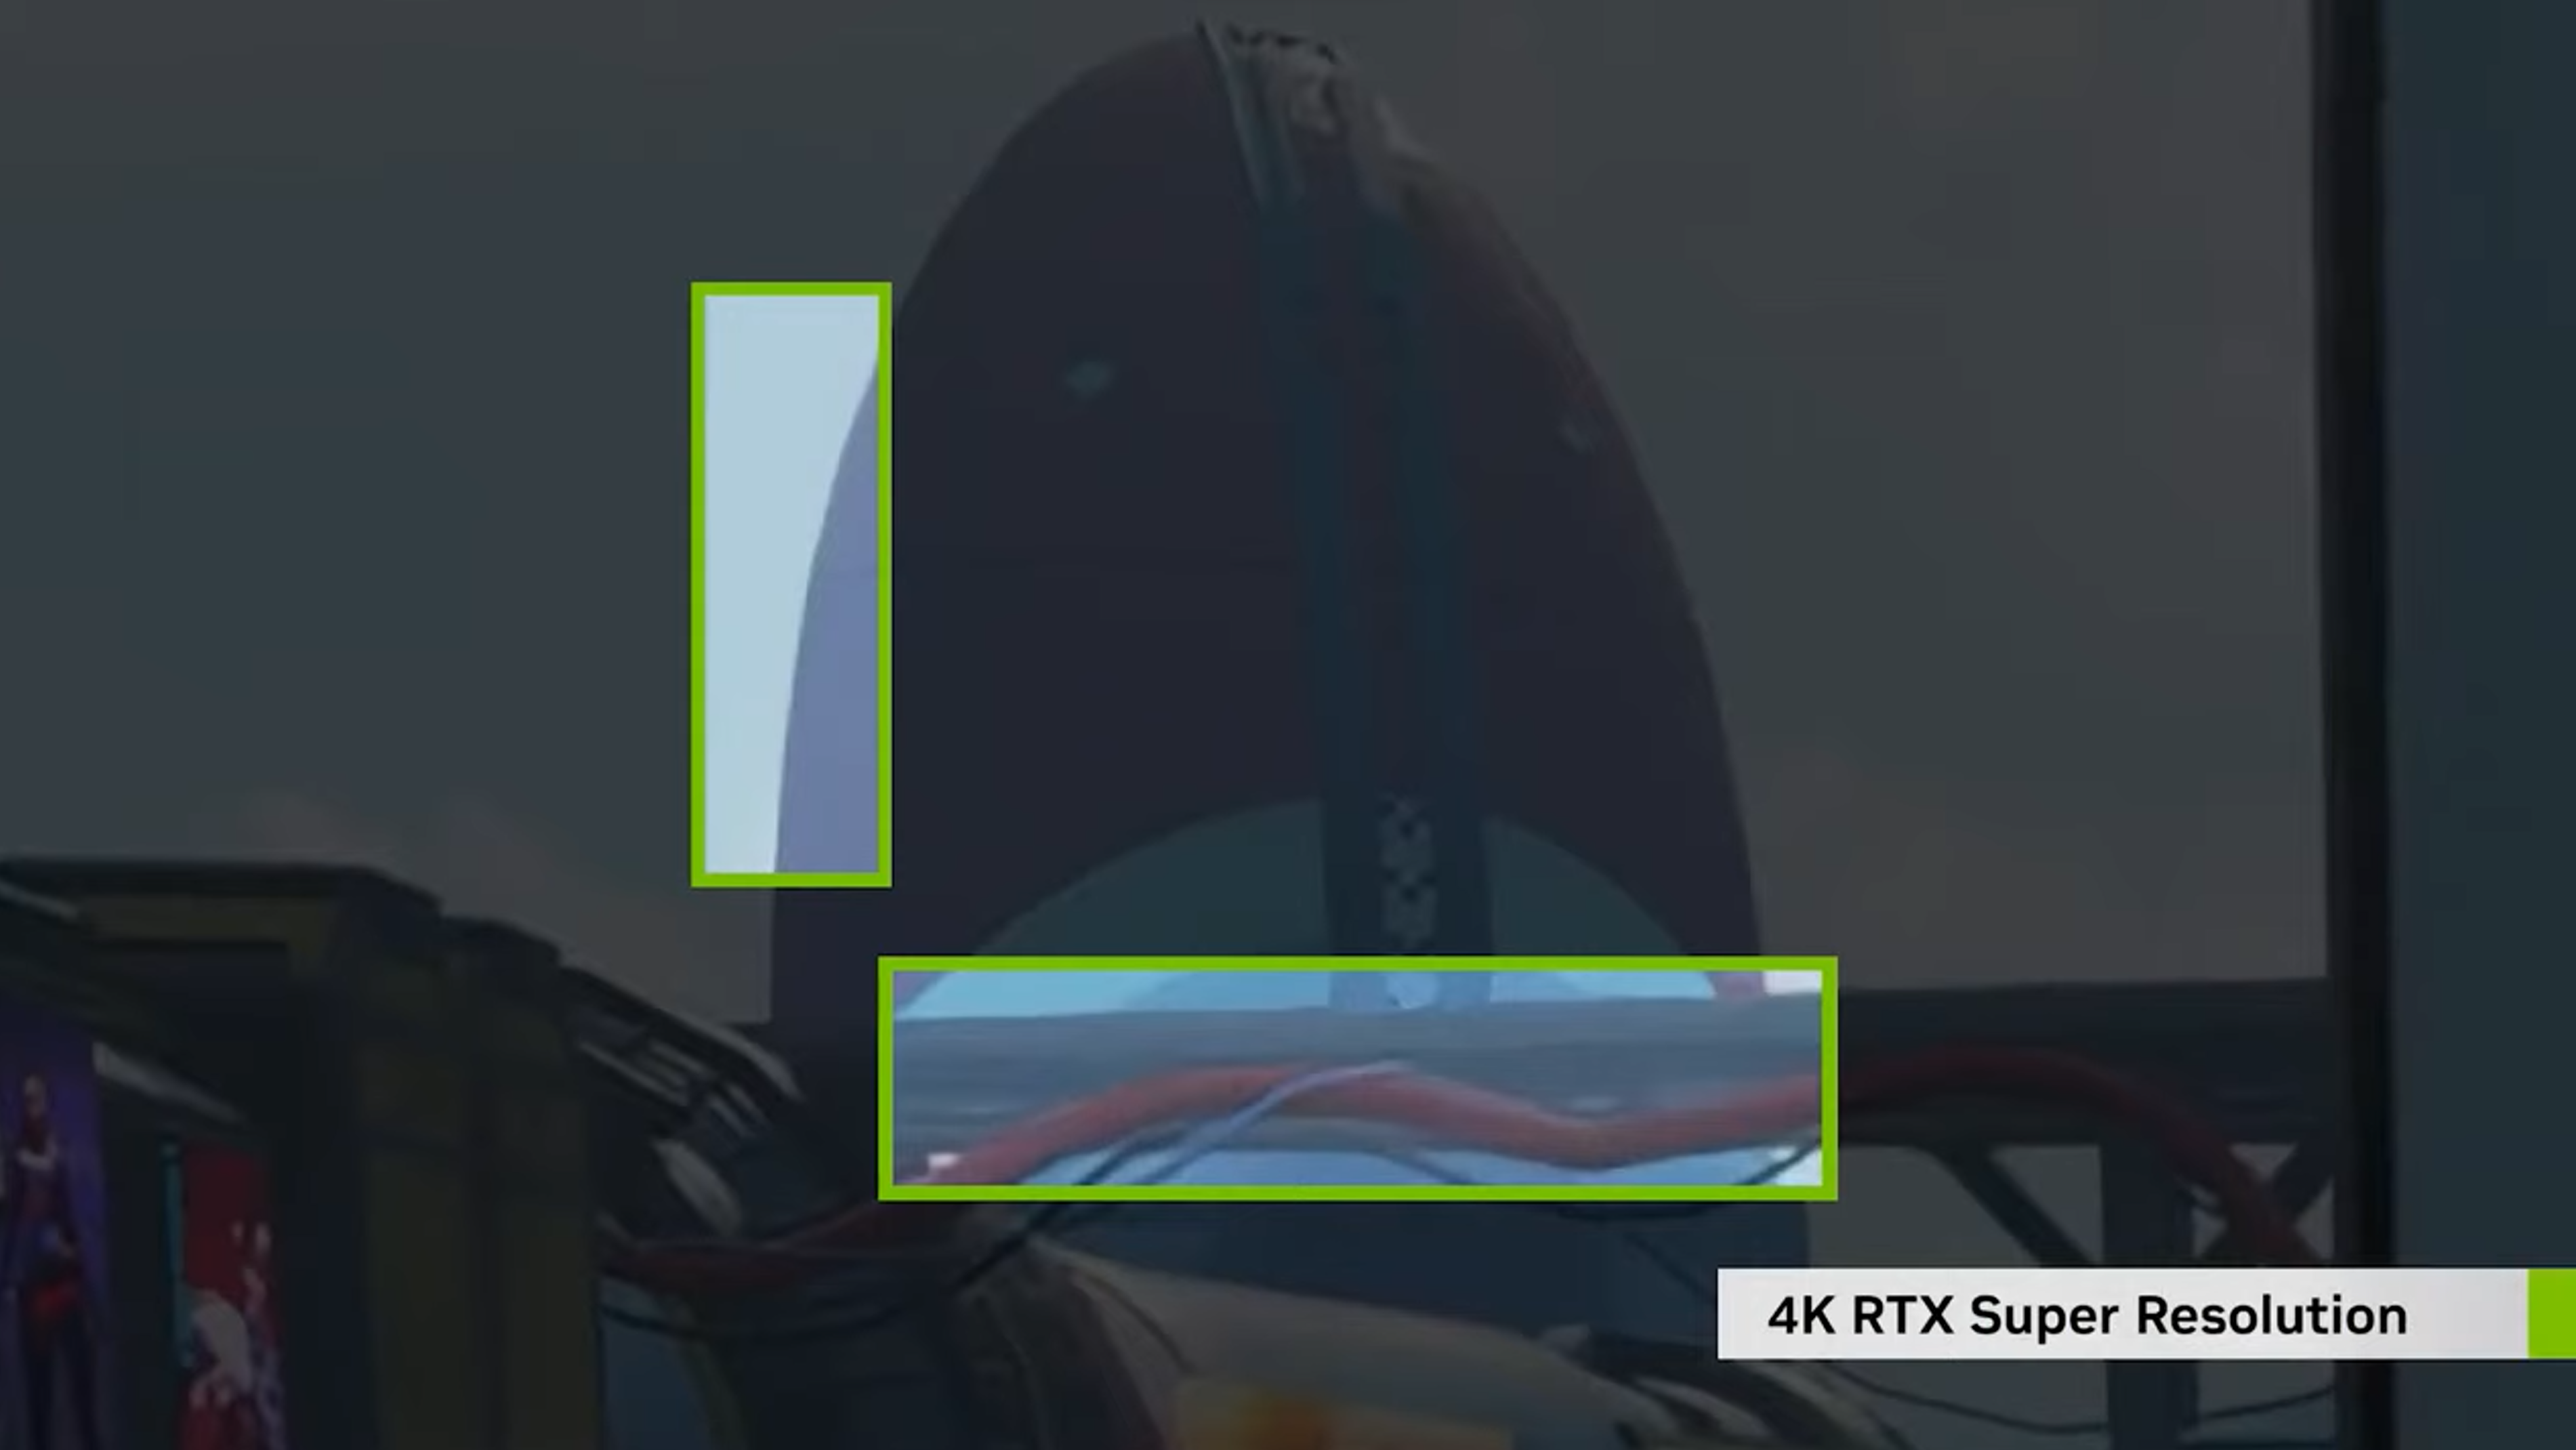 Nvidia RTX Video Super Resolution feature shown off during CES 2023 with Apex Legends clip.